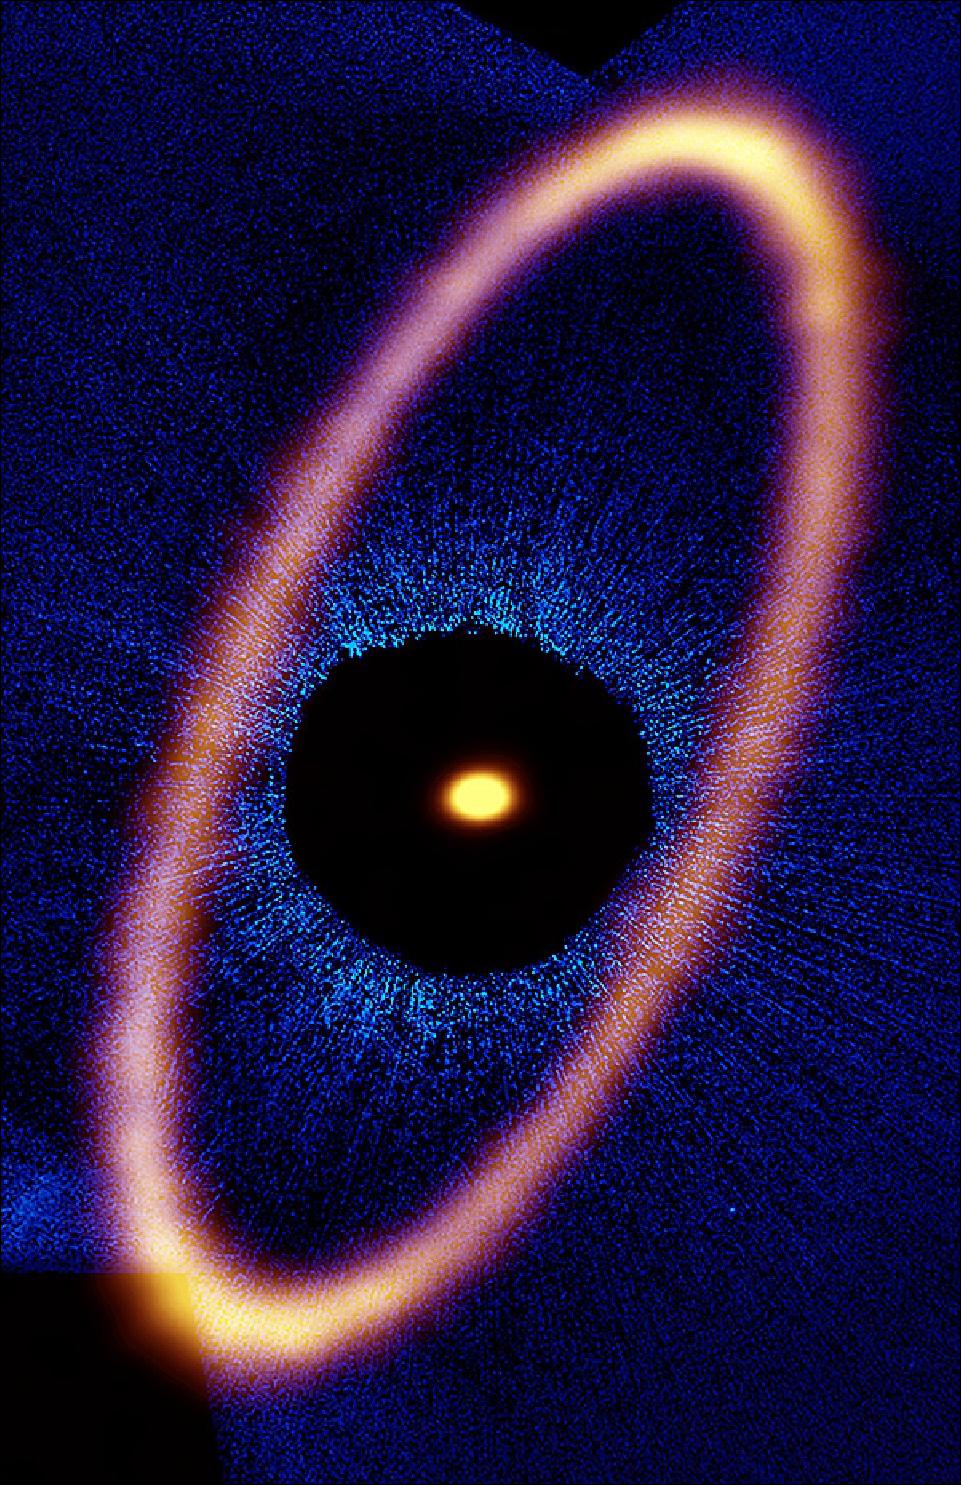 Figure 33: Composite image of the Fomalhaut star system. The ALMA data, shown in orange, reveal the distant and eccentric debris disk in never-before-seen detail. The central dot is the unresolved emission from the star, which is about twice the mass of the Sun. Optical data from the Hubble Space Telescope is in blue; the dark region is a coronagraphic mask, which filtered out the otherwise overwhelming light of the central star [image credit: ALMA (ESO/NAOJ/NRAO), M. MacGregor; NASA/ESA Hubble, P. Kalas; B. Saxton (NRAO/AUI/NSF)]